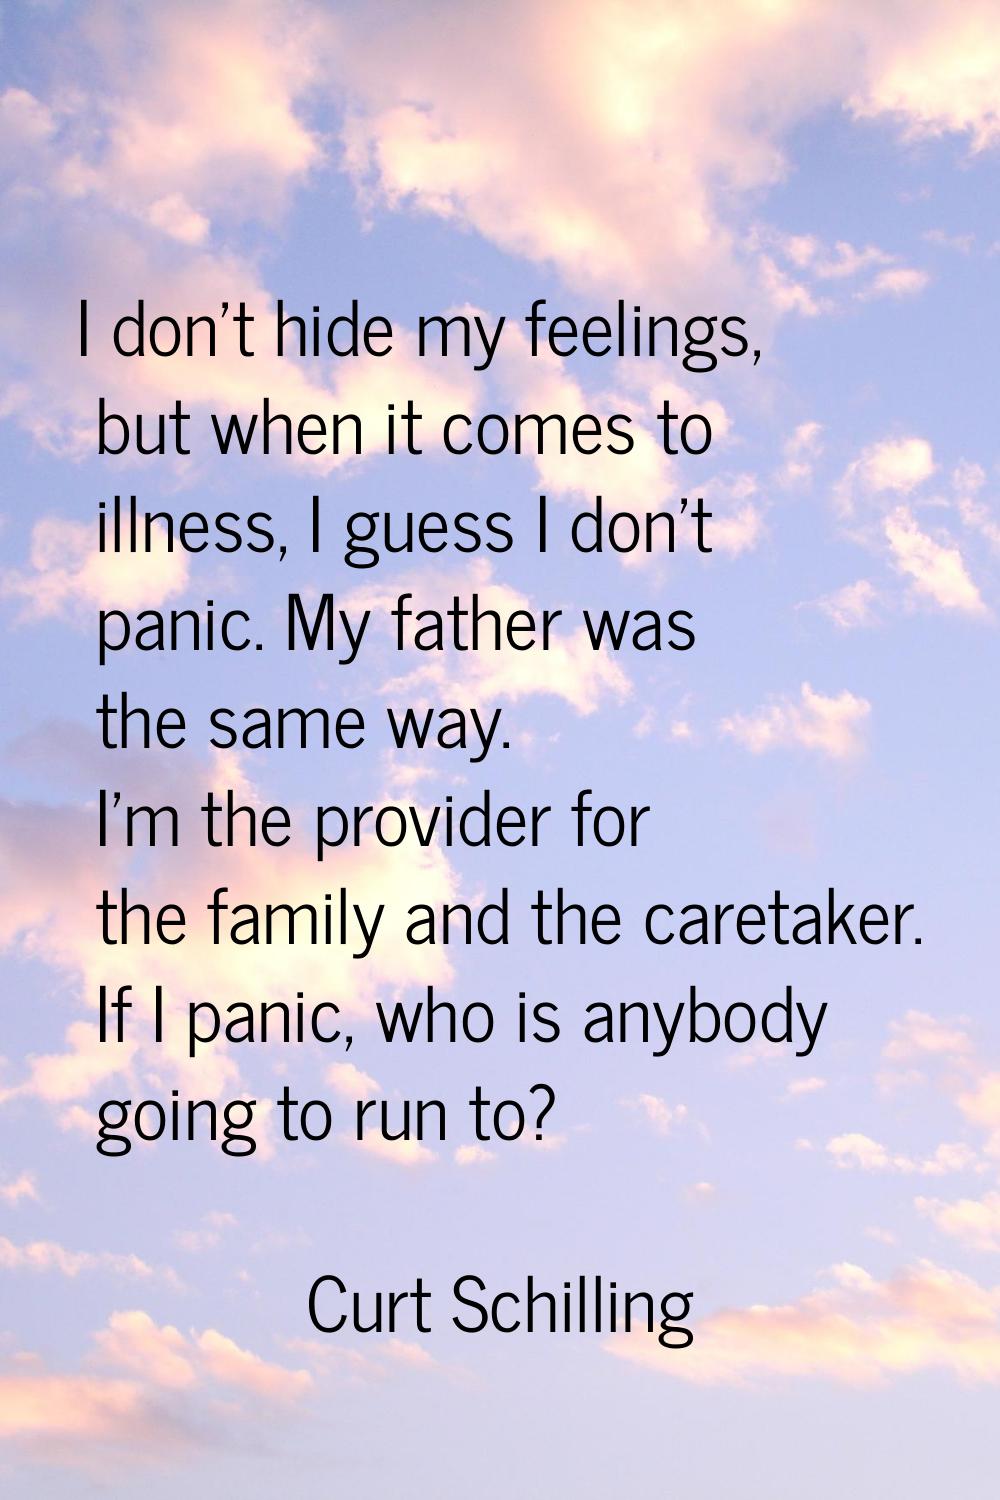 I don't hide my feelings, but when it comes to illness, I guess I don't panic. My father was the sa